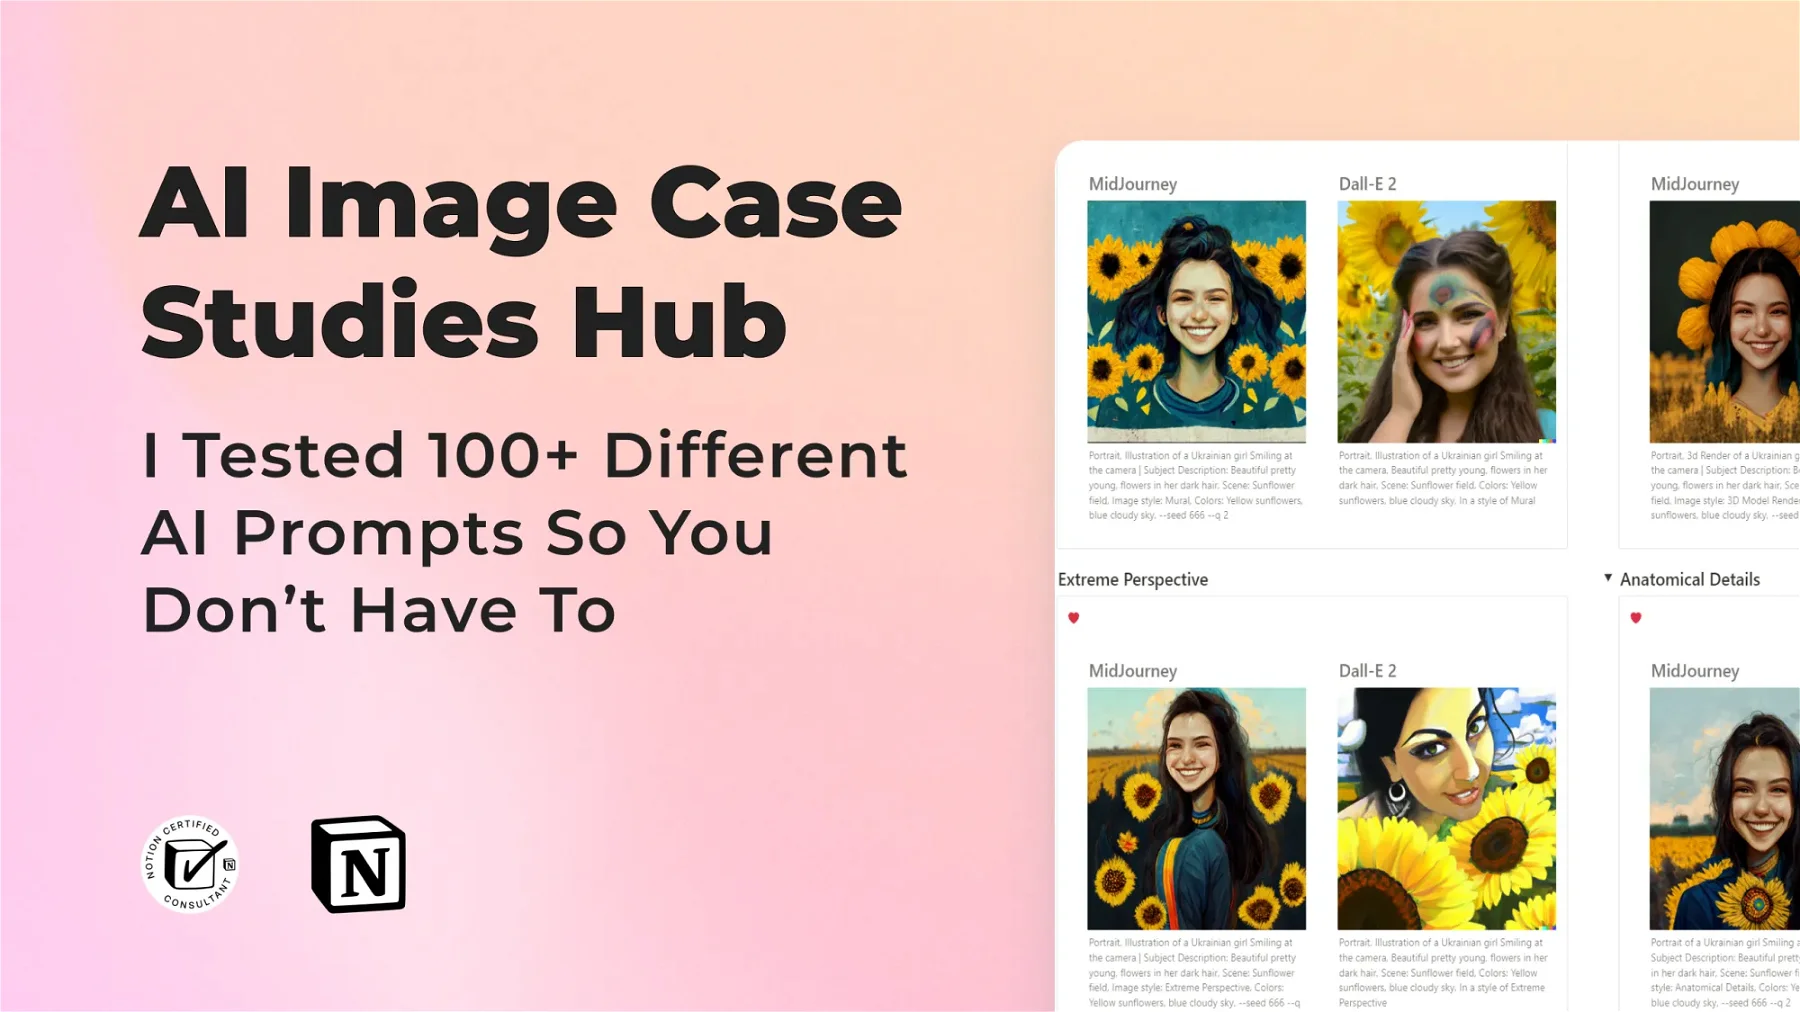 ðŸ“· Discover the Power of AI Imagery - AI Image Case Studies Hub